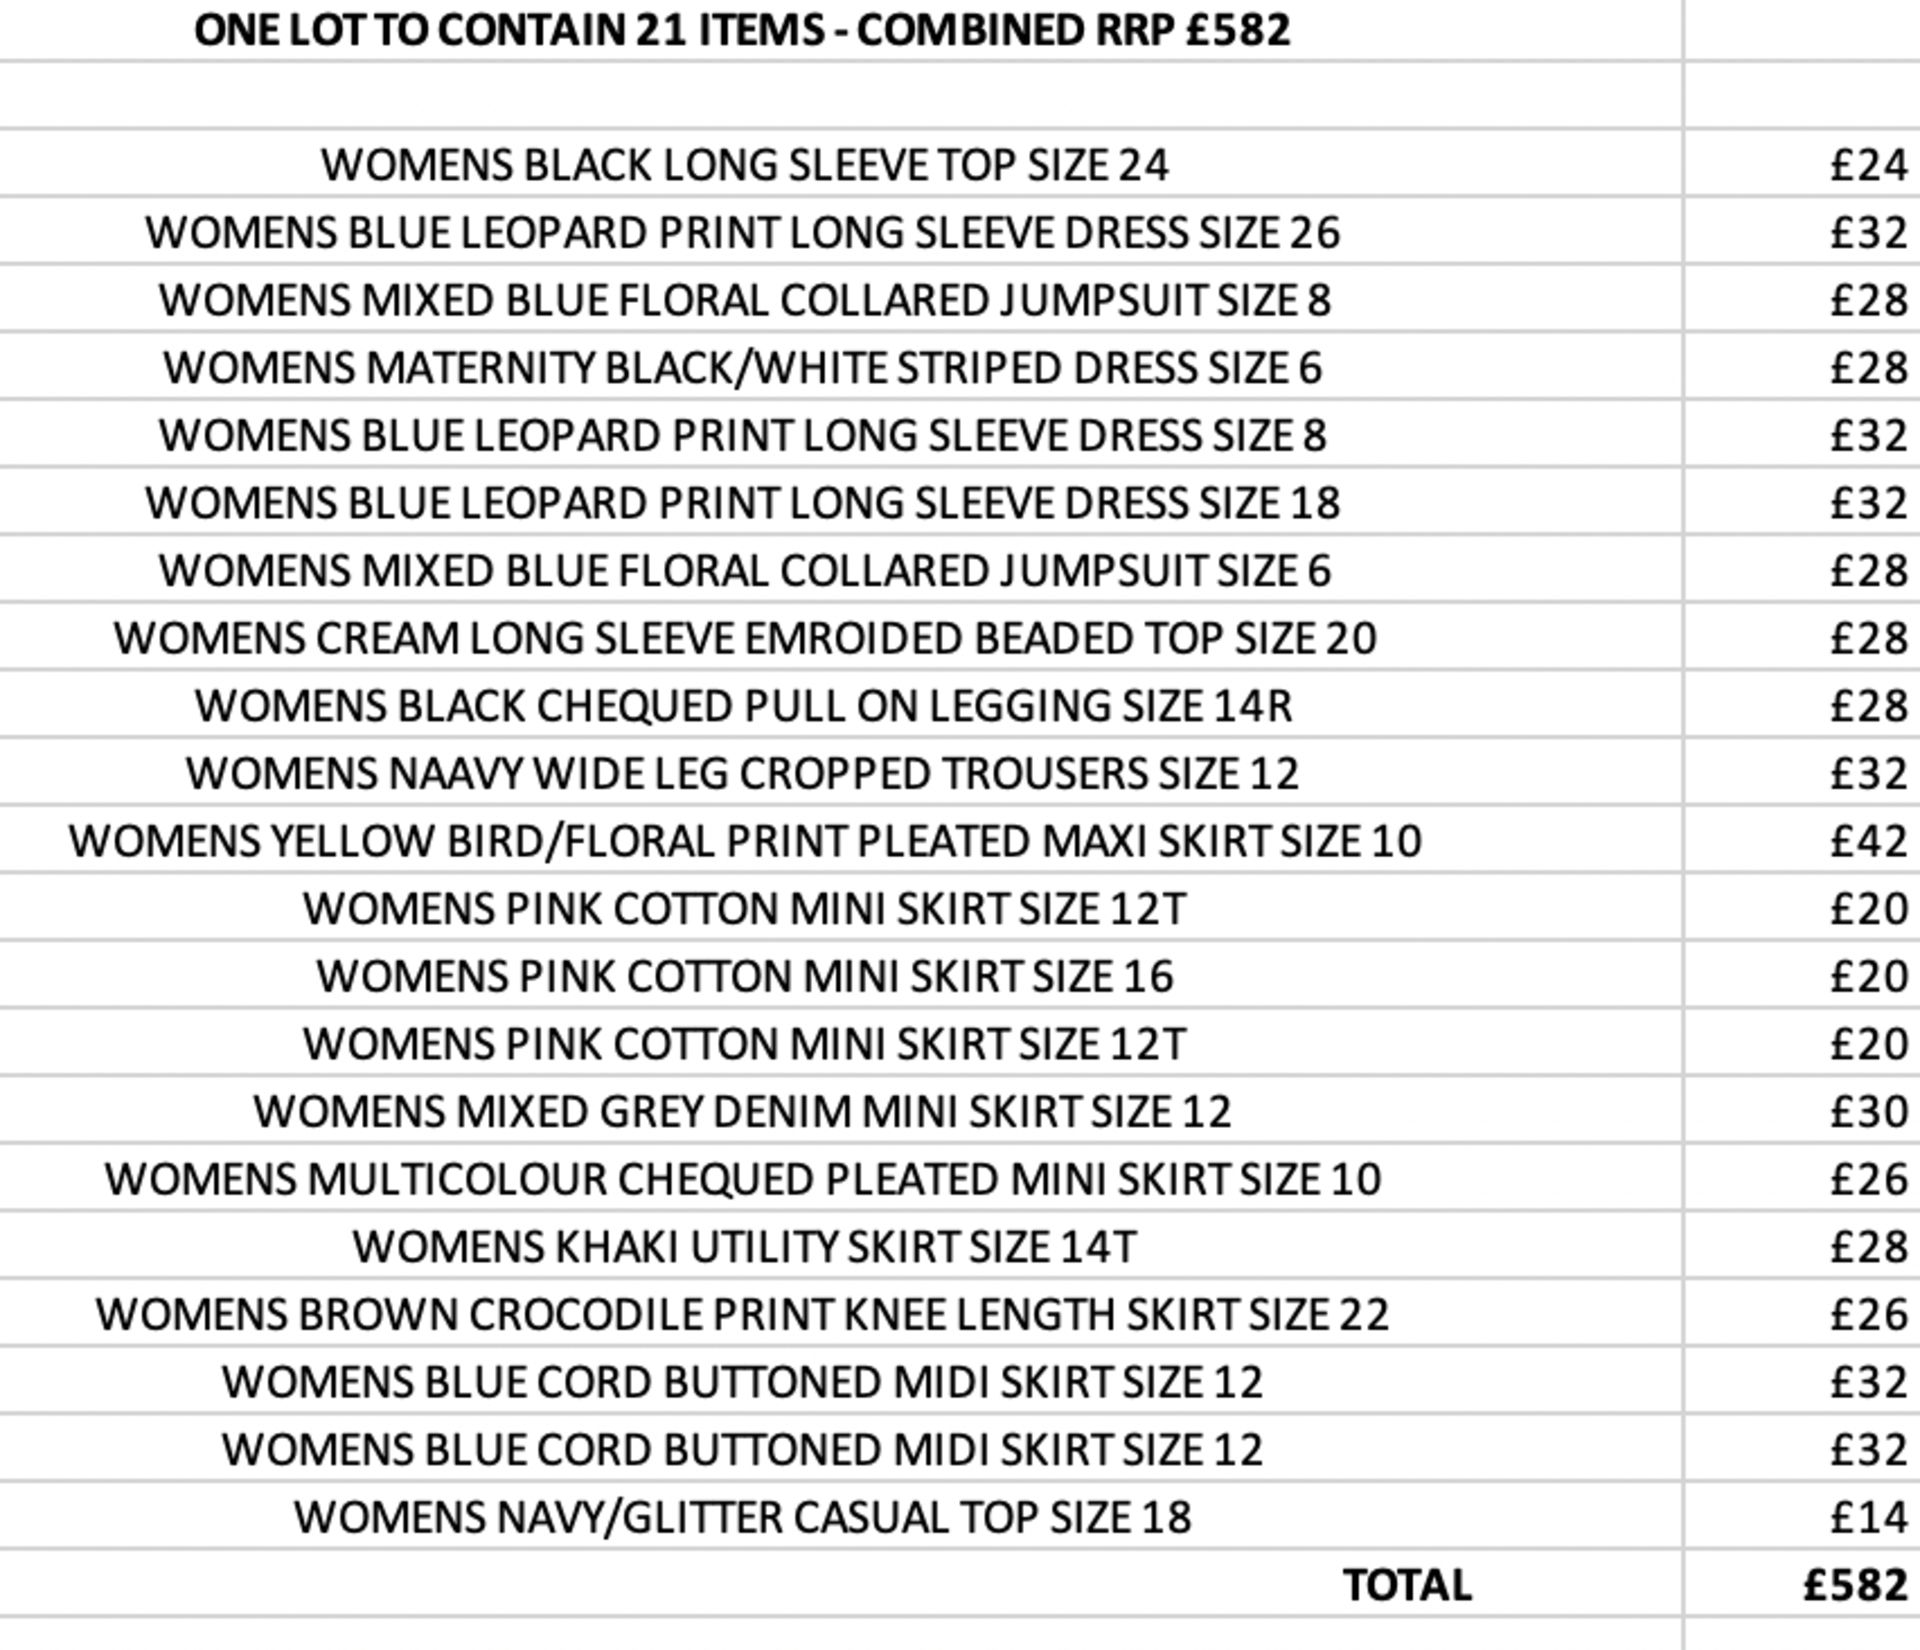 ONE LOT TO CONTAIN 21 NEXT ITEMS - COMBINED RRP £582 (1085)